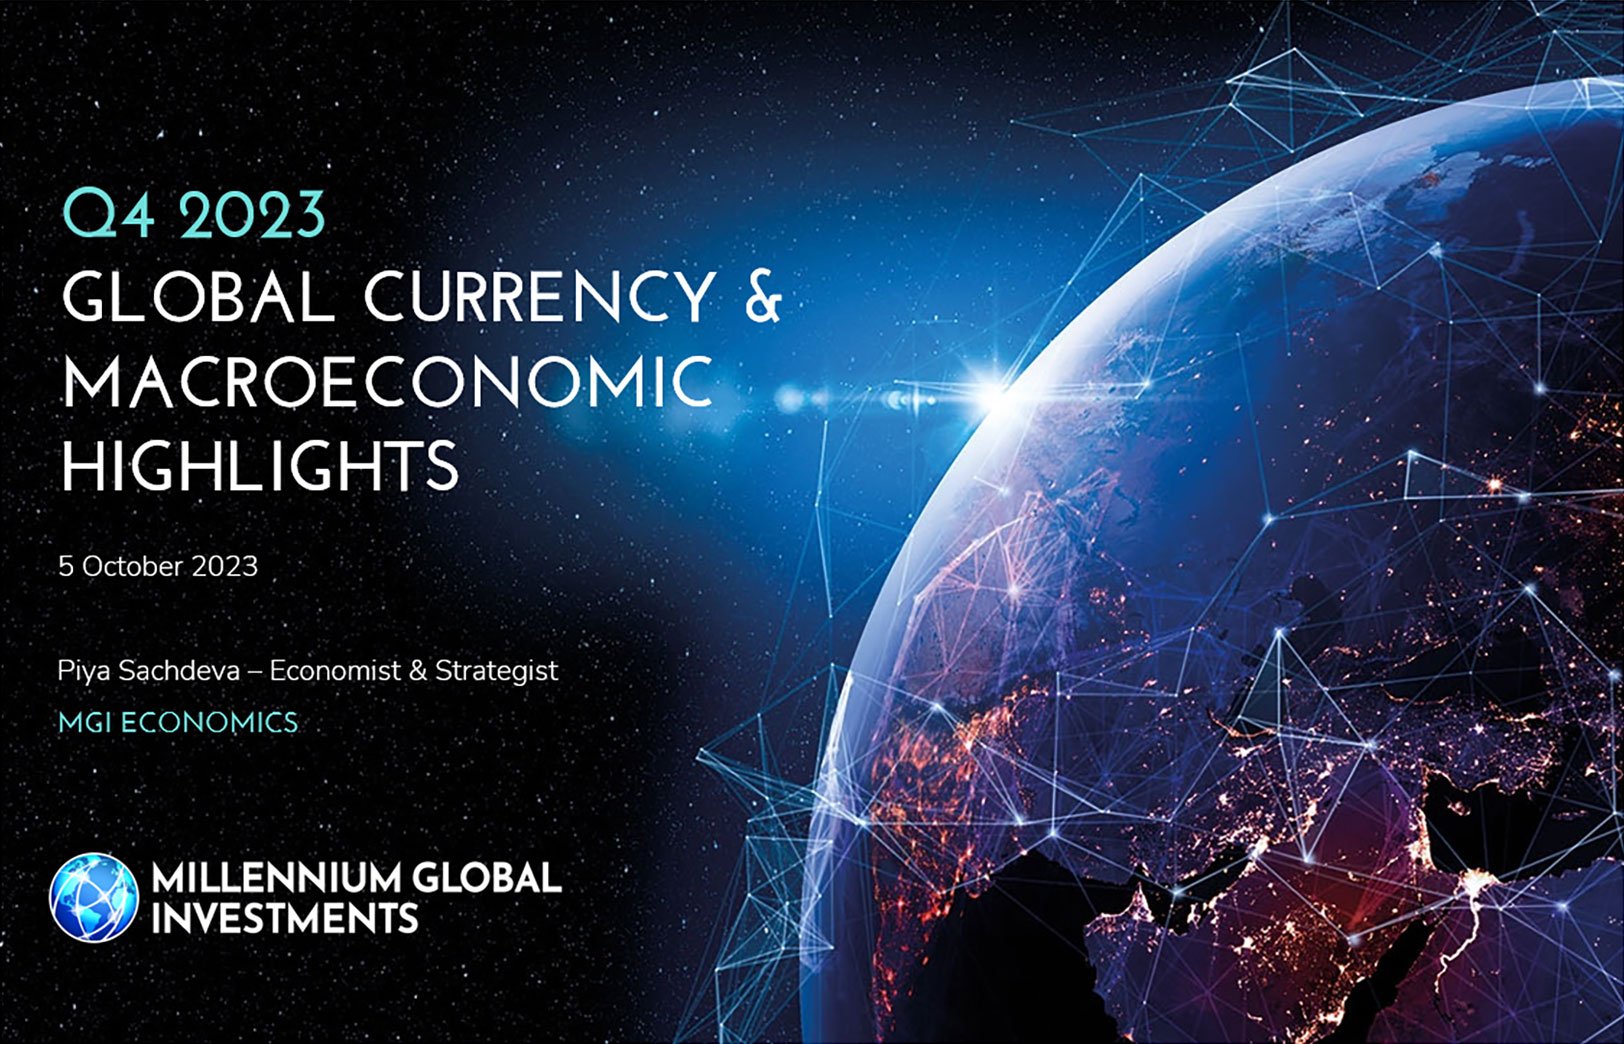 Q4 2023 Global Currency and Macroeconomic Outlook